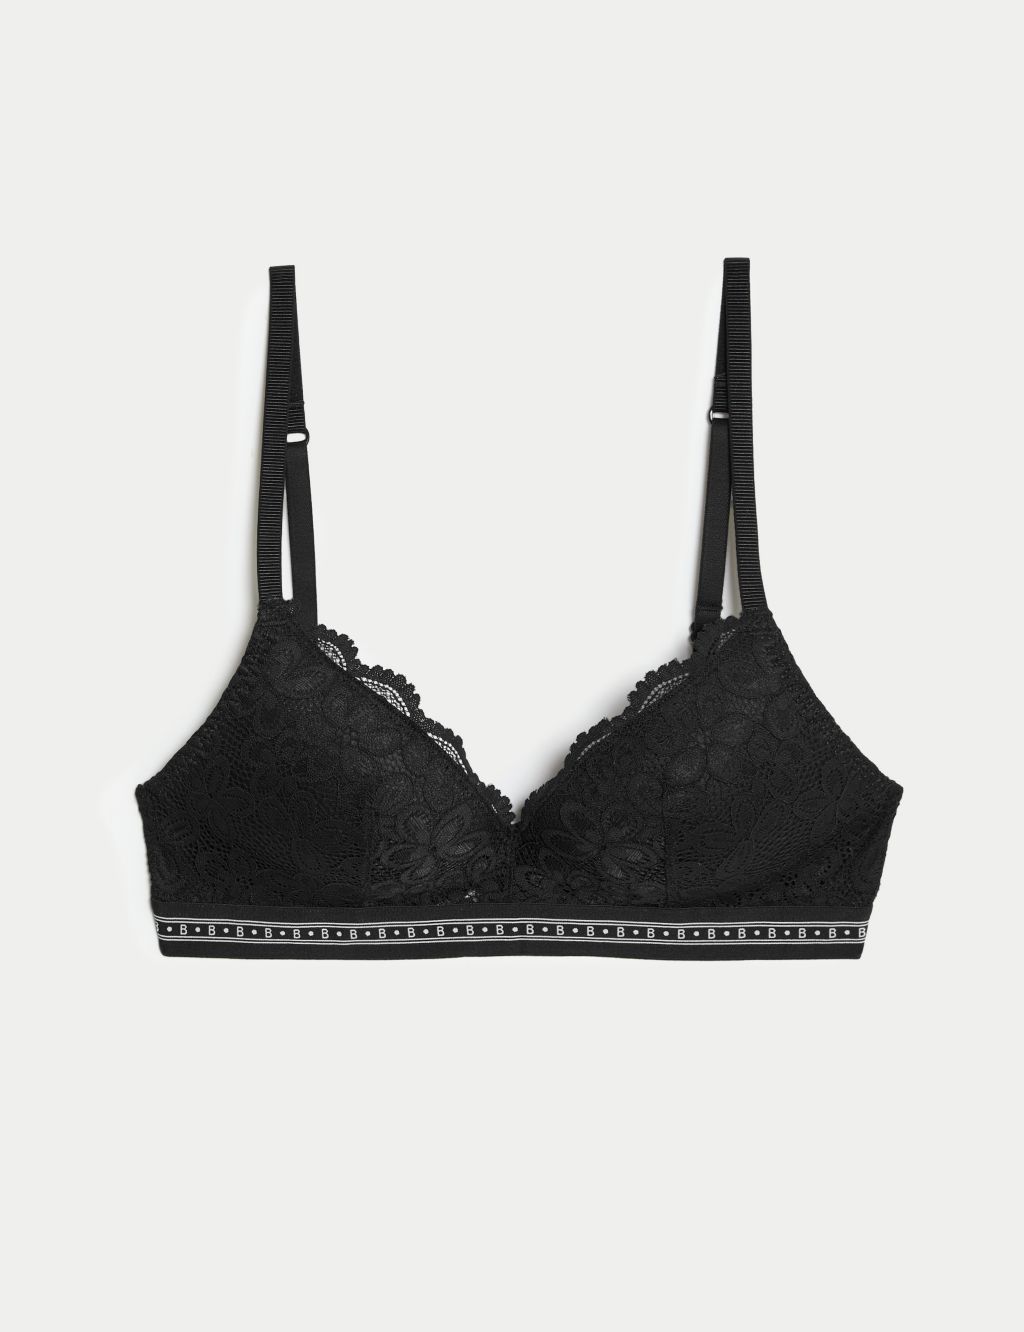 ex M&S BOUTIQUE JOY LACE NON WIRED, PADDED PLUNGE BRA In BLACK Size 40E